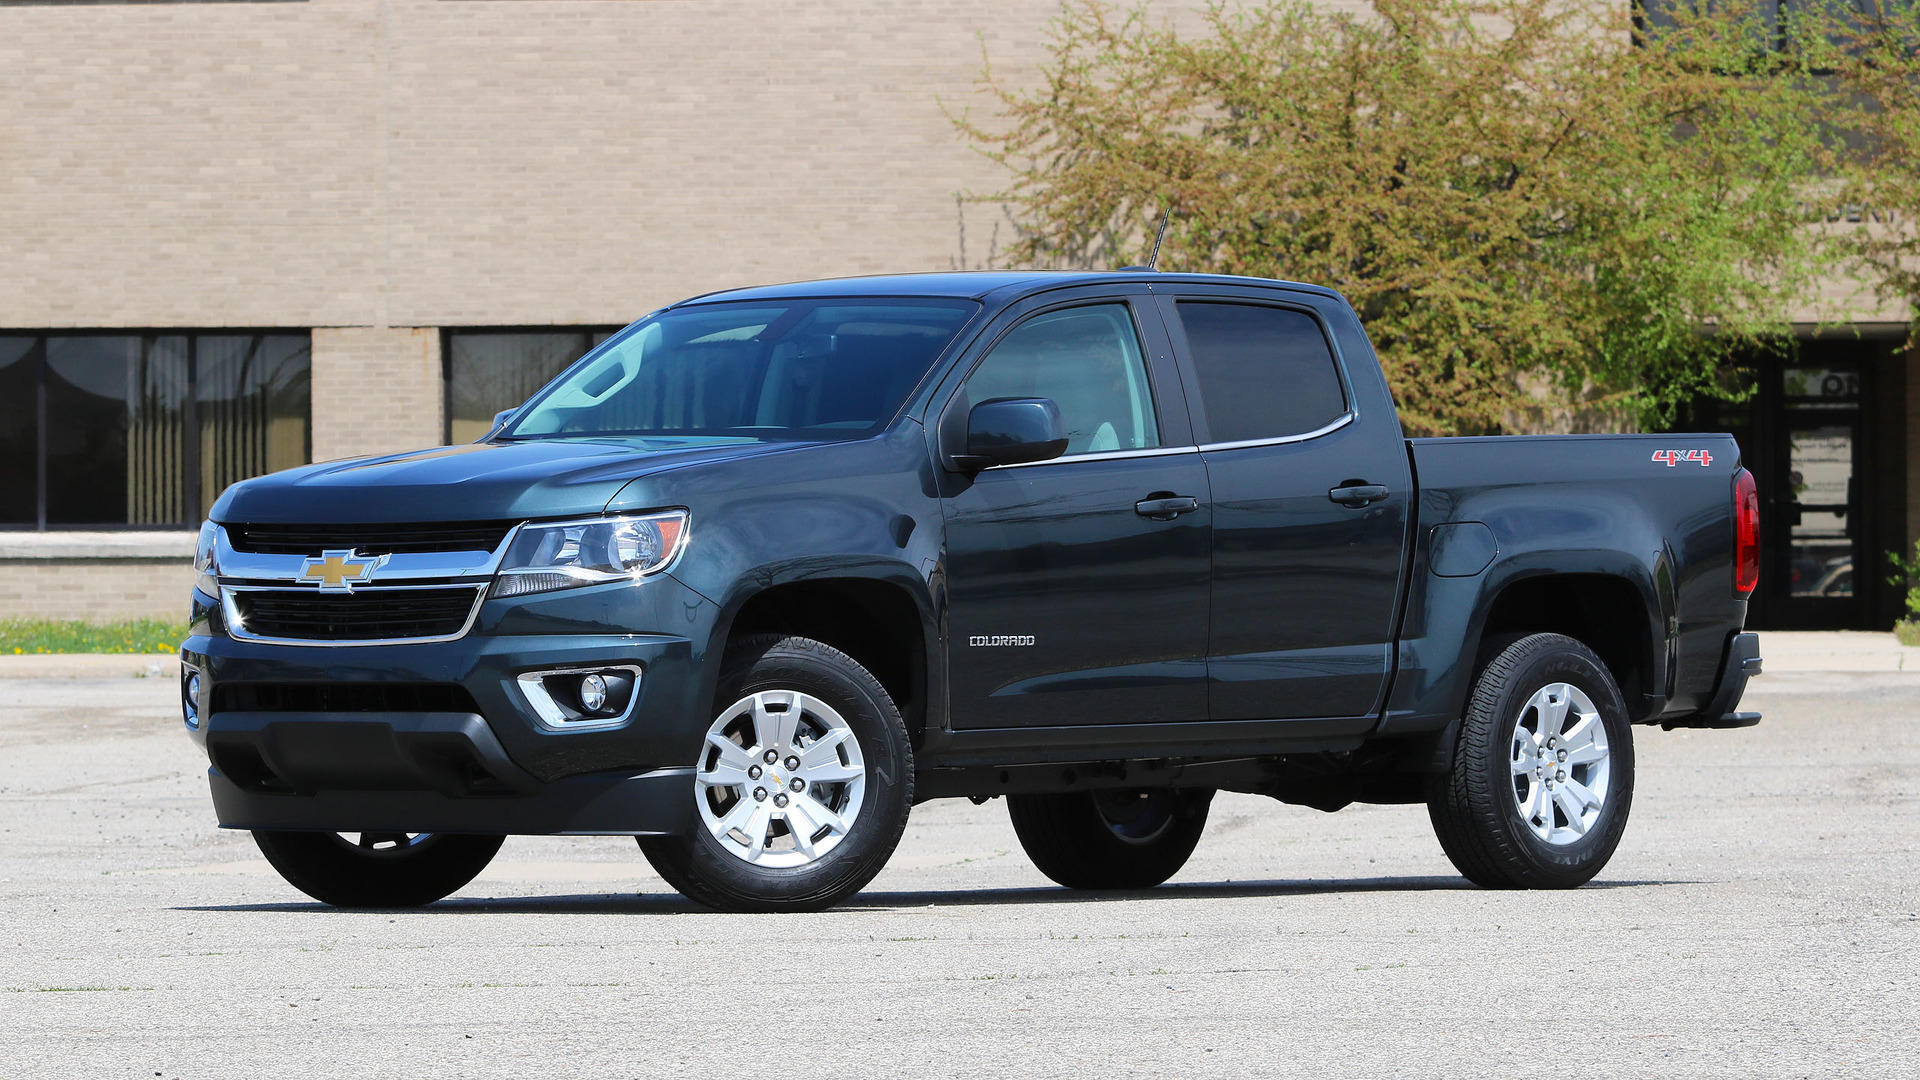 2017 Chevy Colorado Review: All You Need From A Truck, Scaled Down